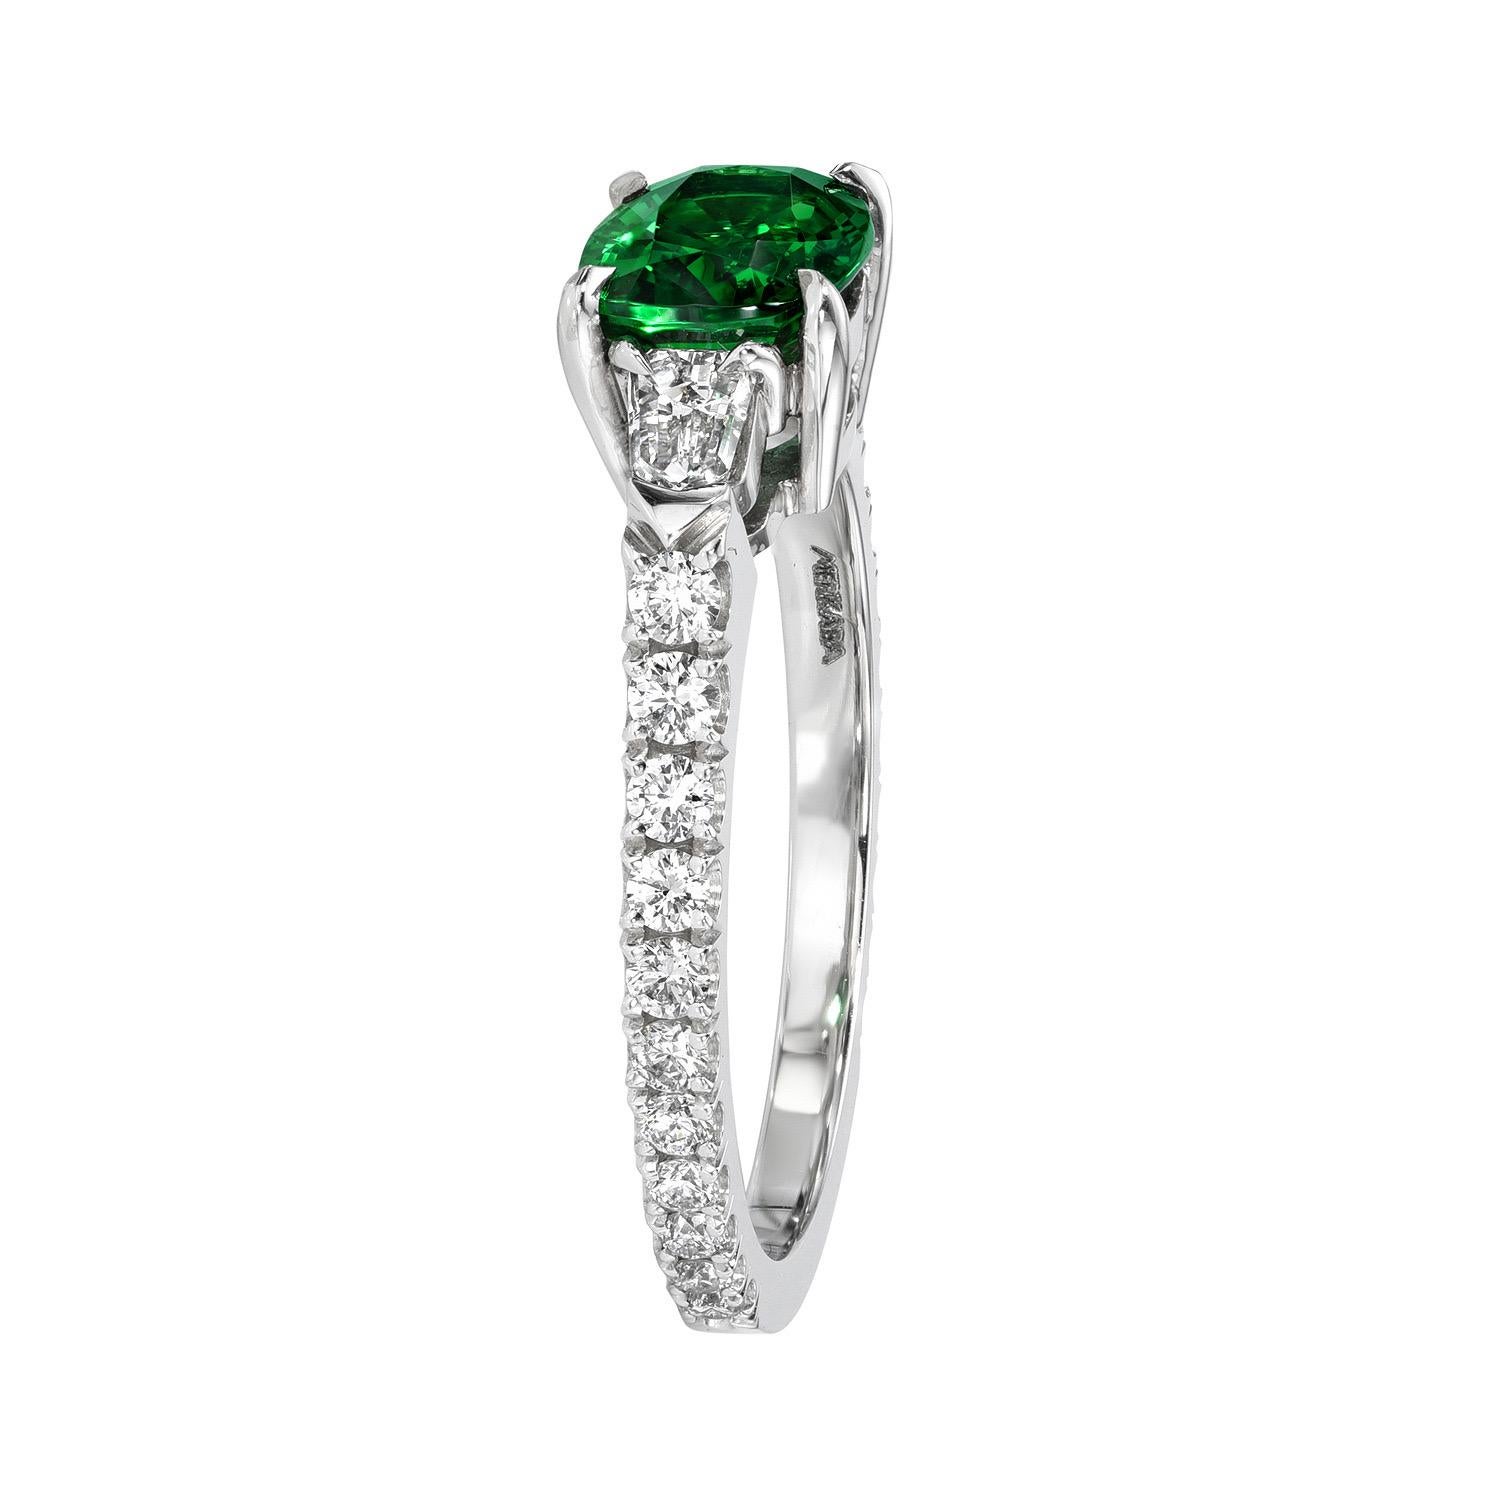 Superb 1.34 carat Tsavorite Garnet cushion platinum ring, flanked by a pair of 0.21 carat D/VS1 diamond bullets, and a total of 0.41 carat round brilliant collection diamonds.
Ring size 6. Resizing is complementary upon request.
Crafted by extremely